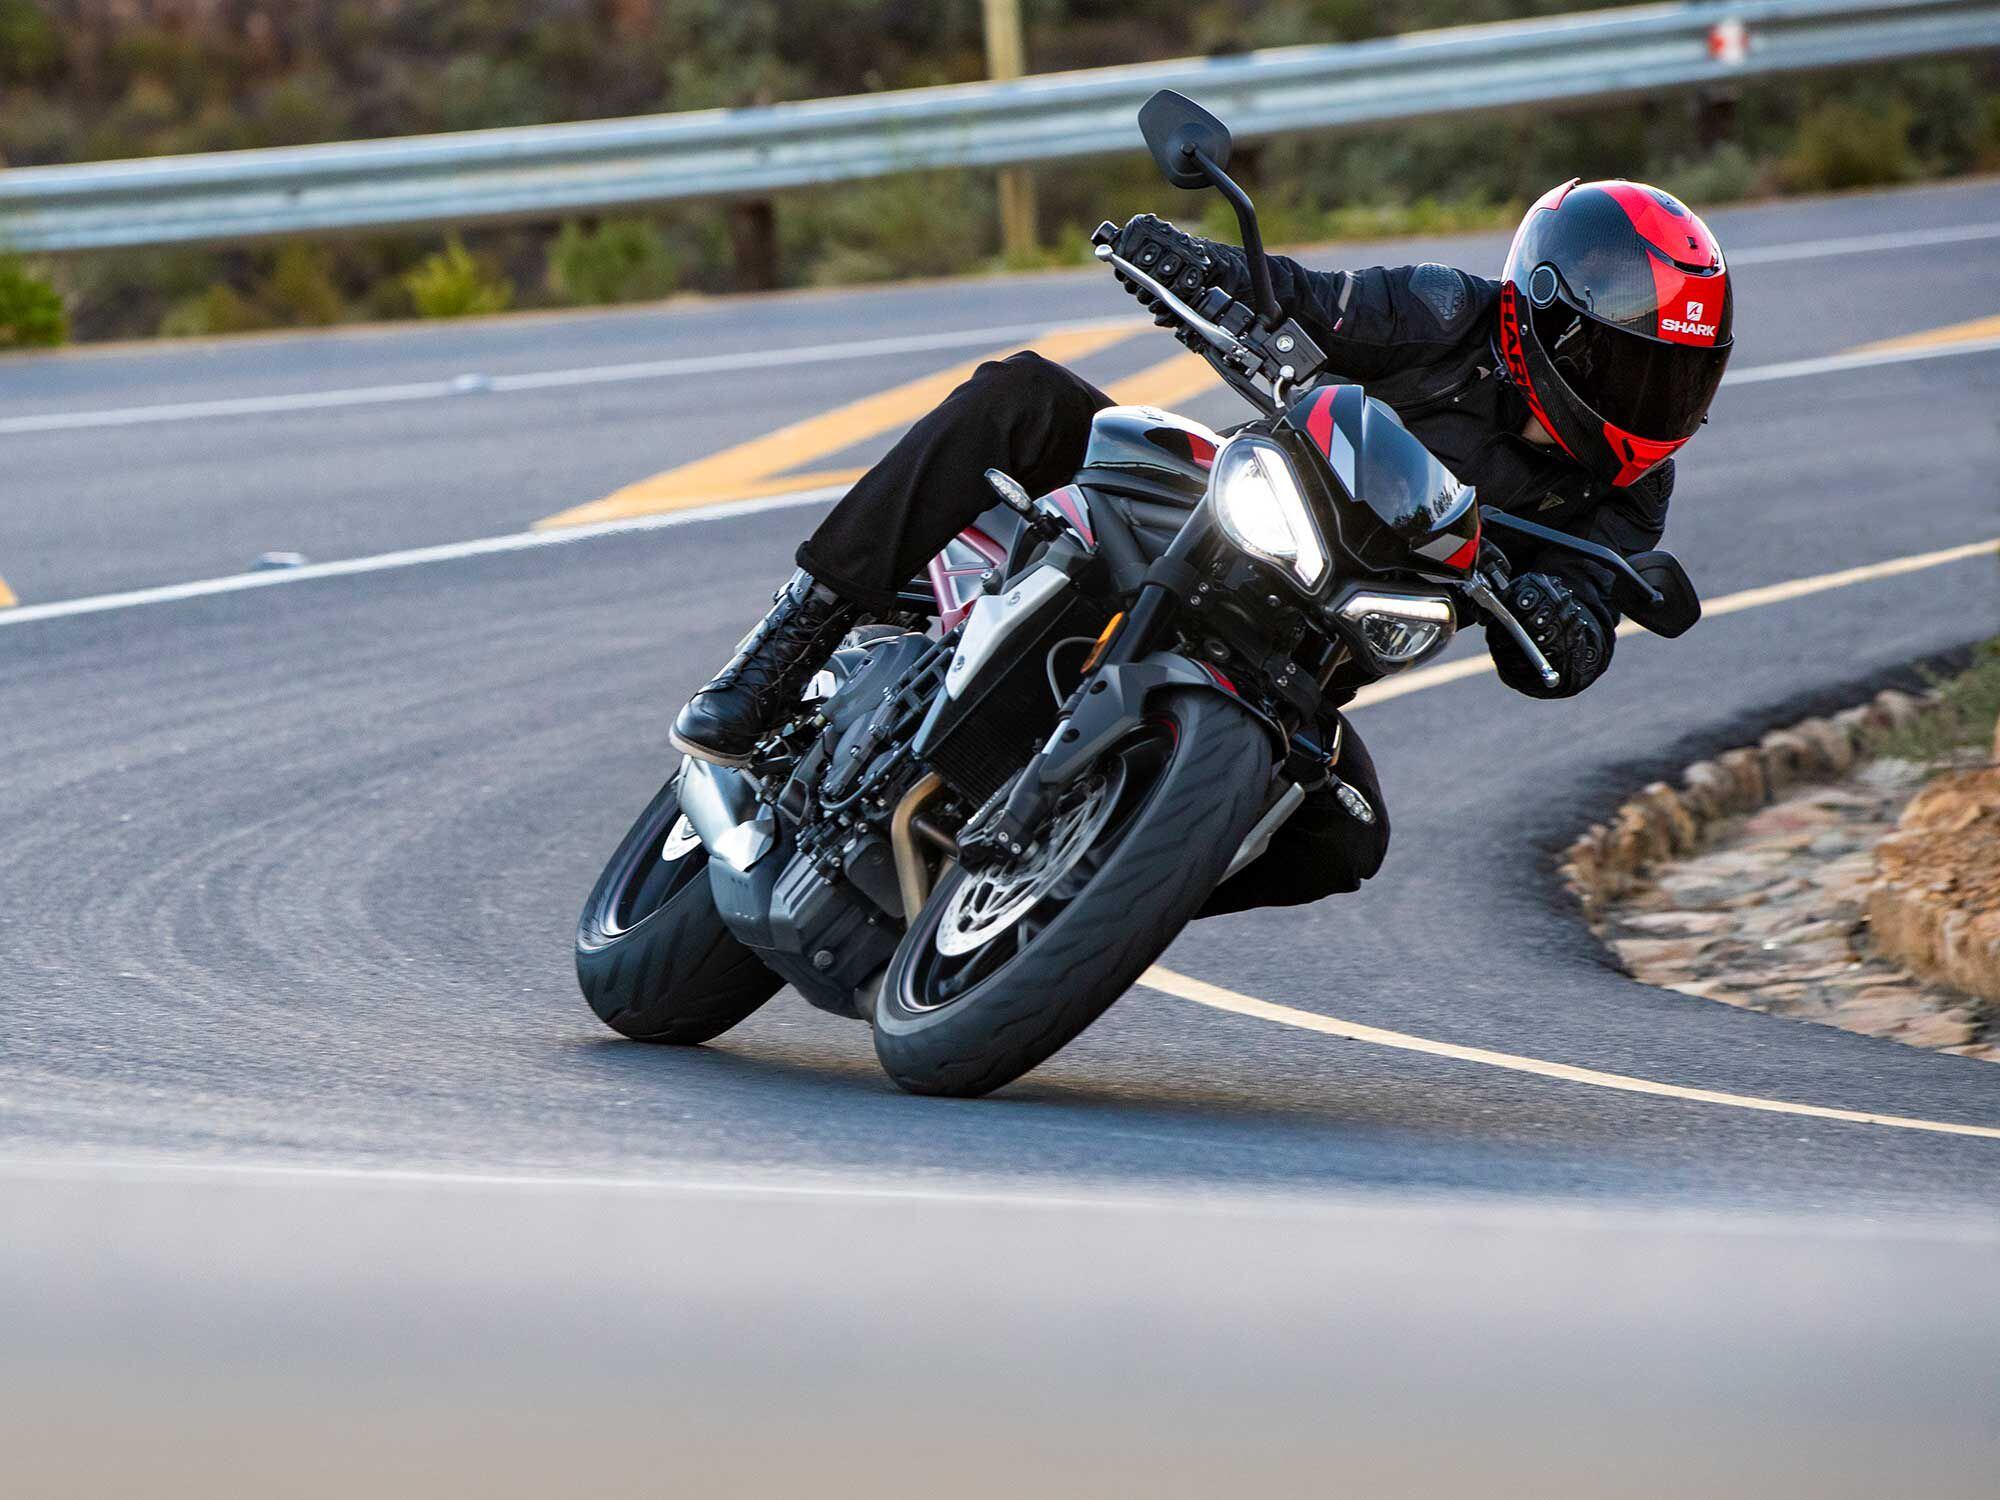 The Triumph Street Triple platform has style and class.